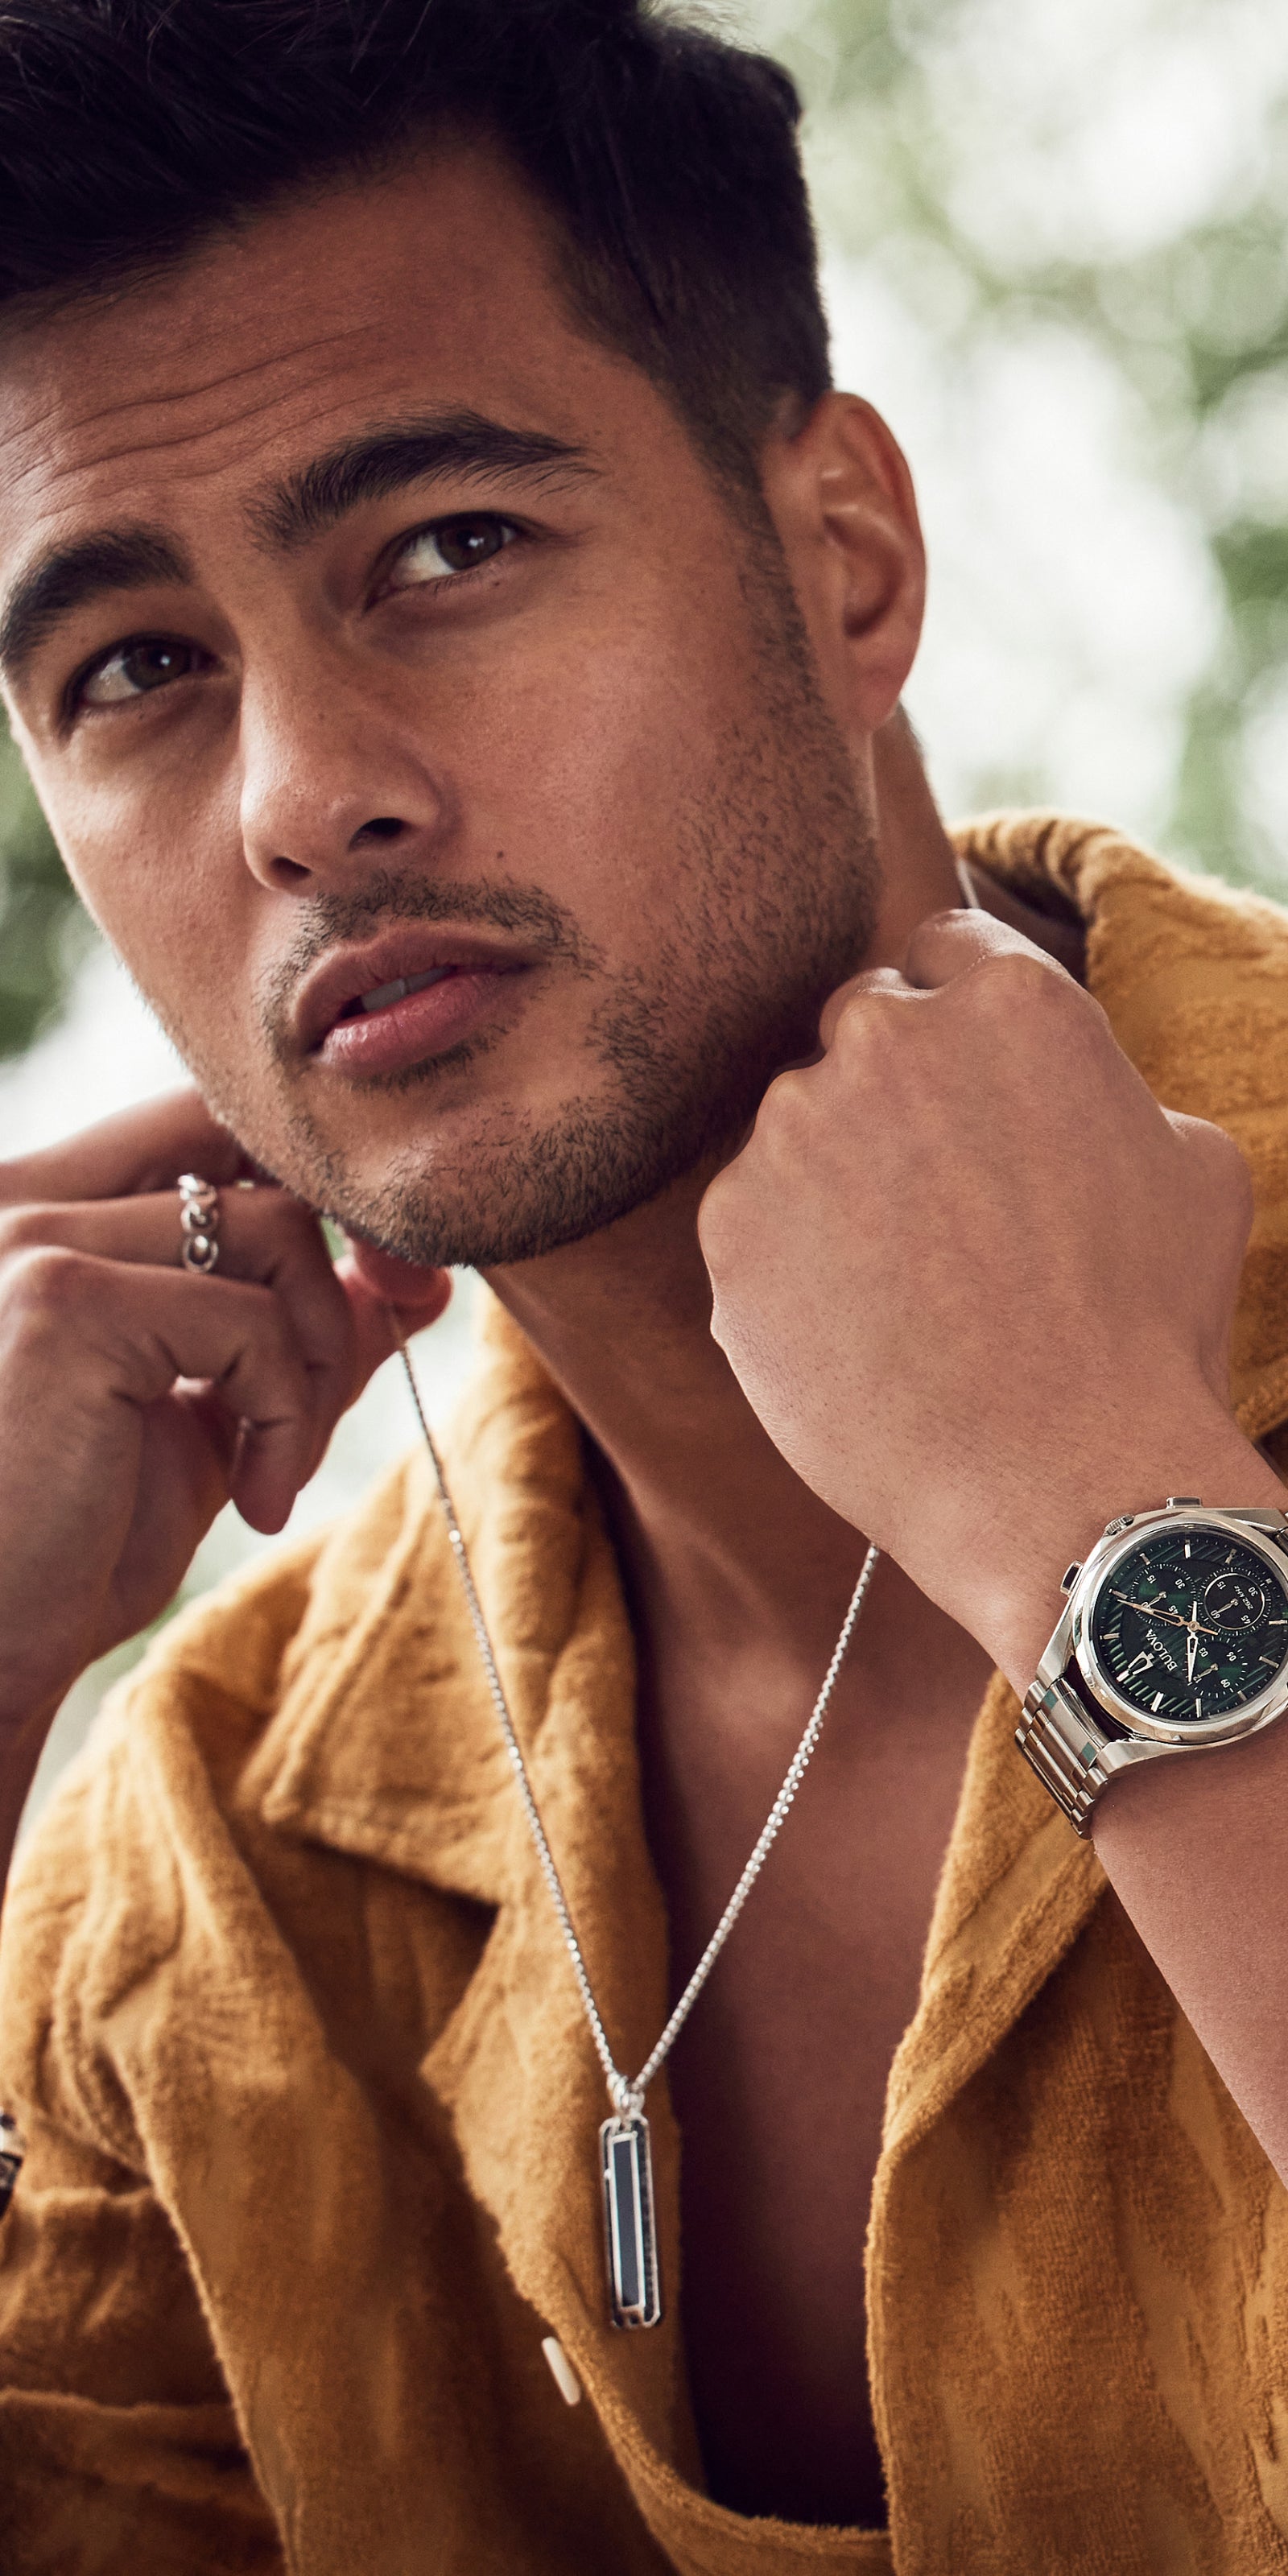 Men's Watches Australia Made With Precision Technology | Bulova